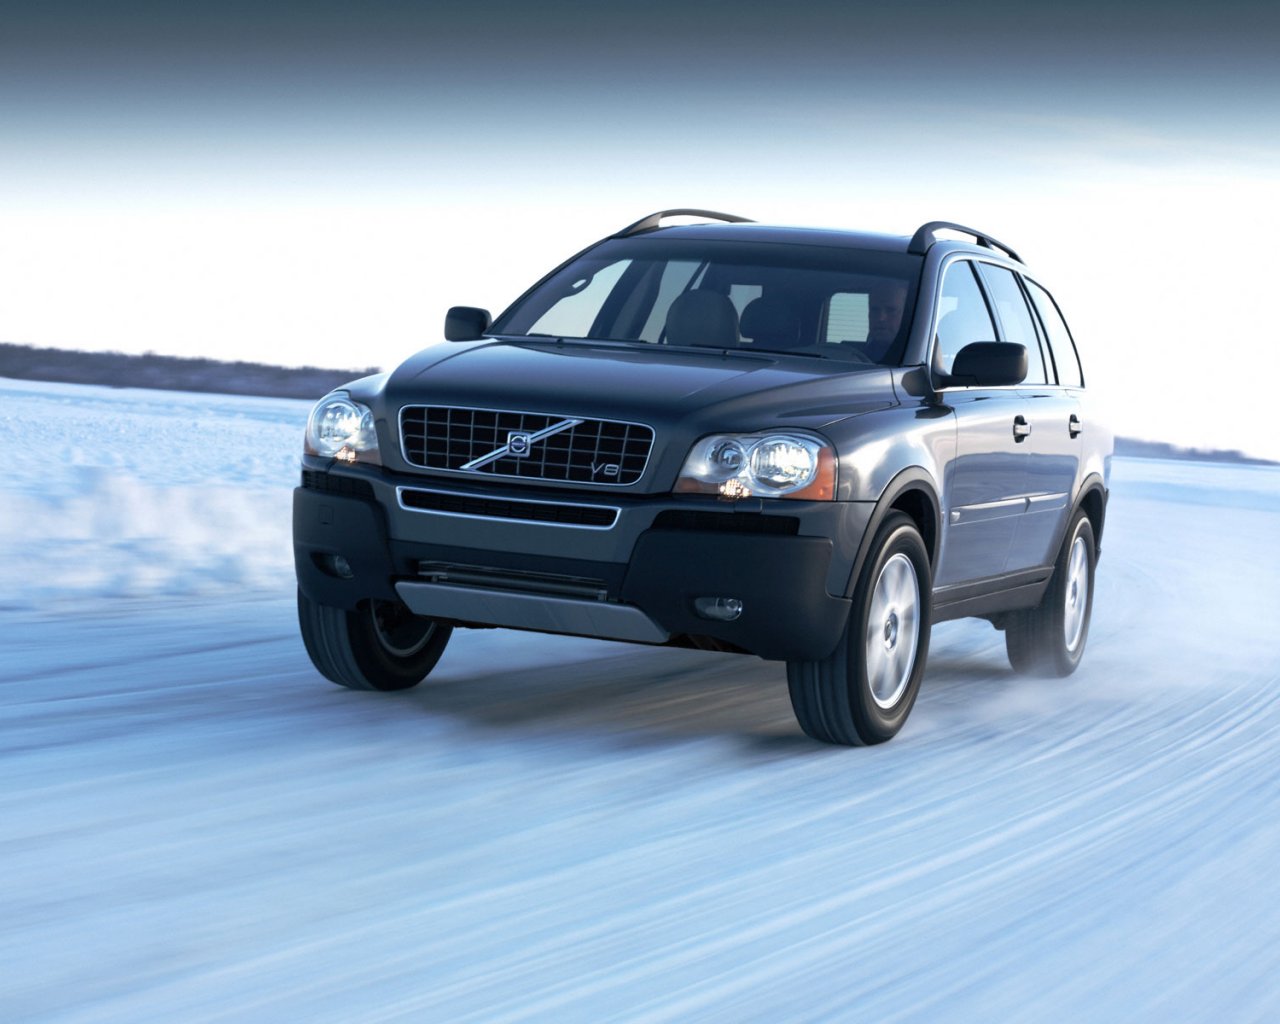 Swotti - Volvo XC90, The most relevant opinions